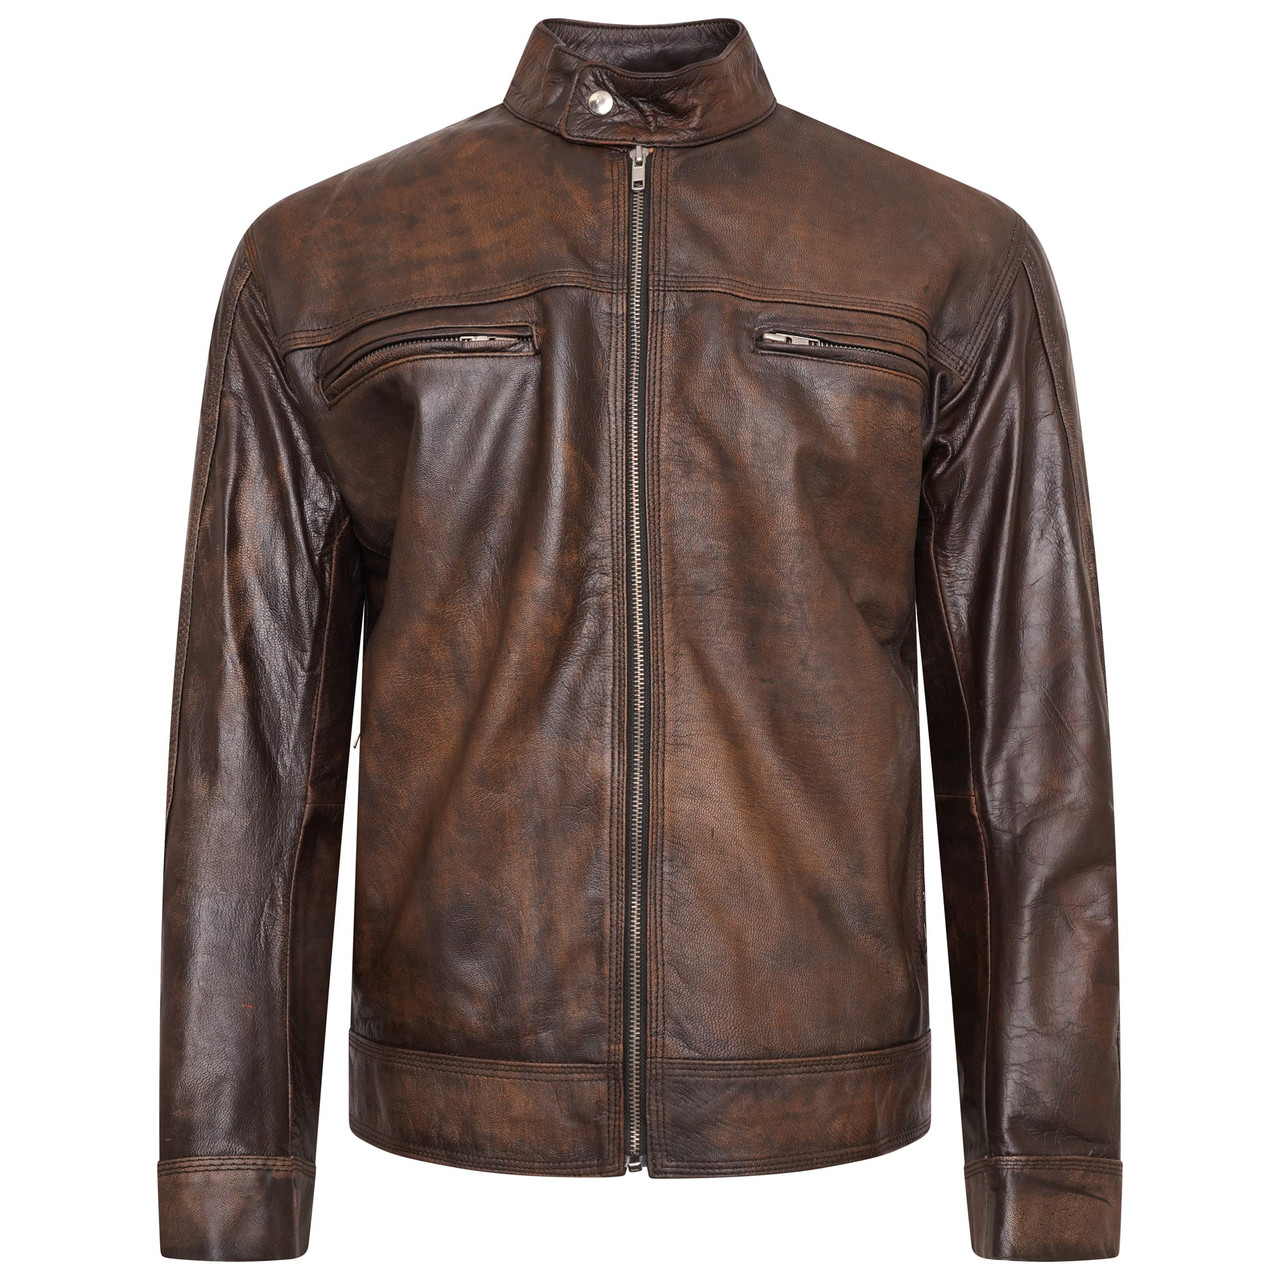 Popular Colours and Styles of Men’s Leather Jackets - Feather Skin